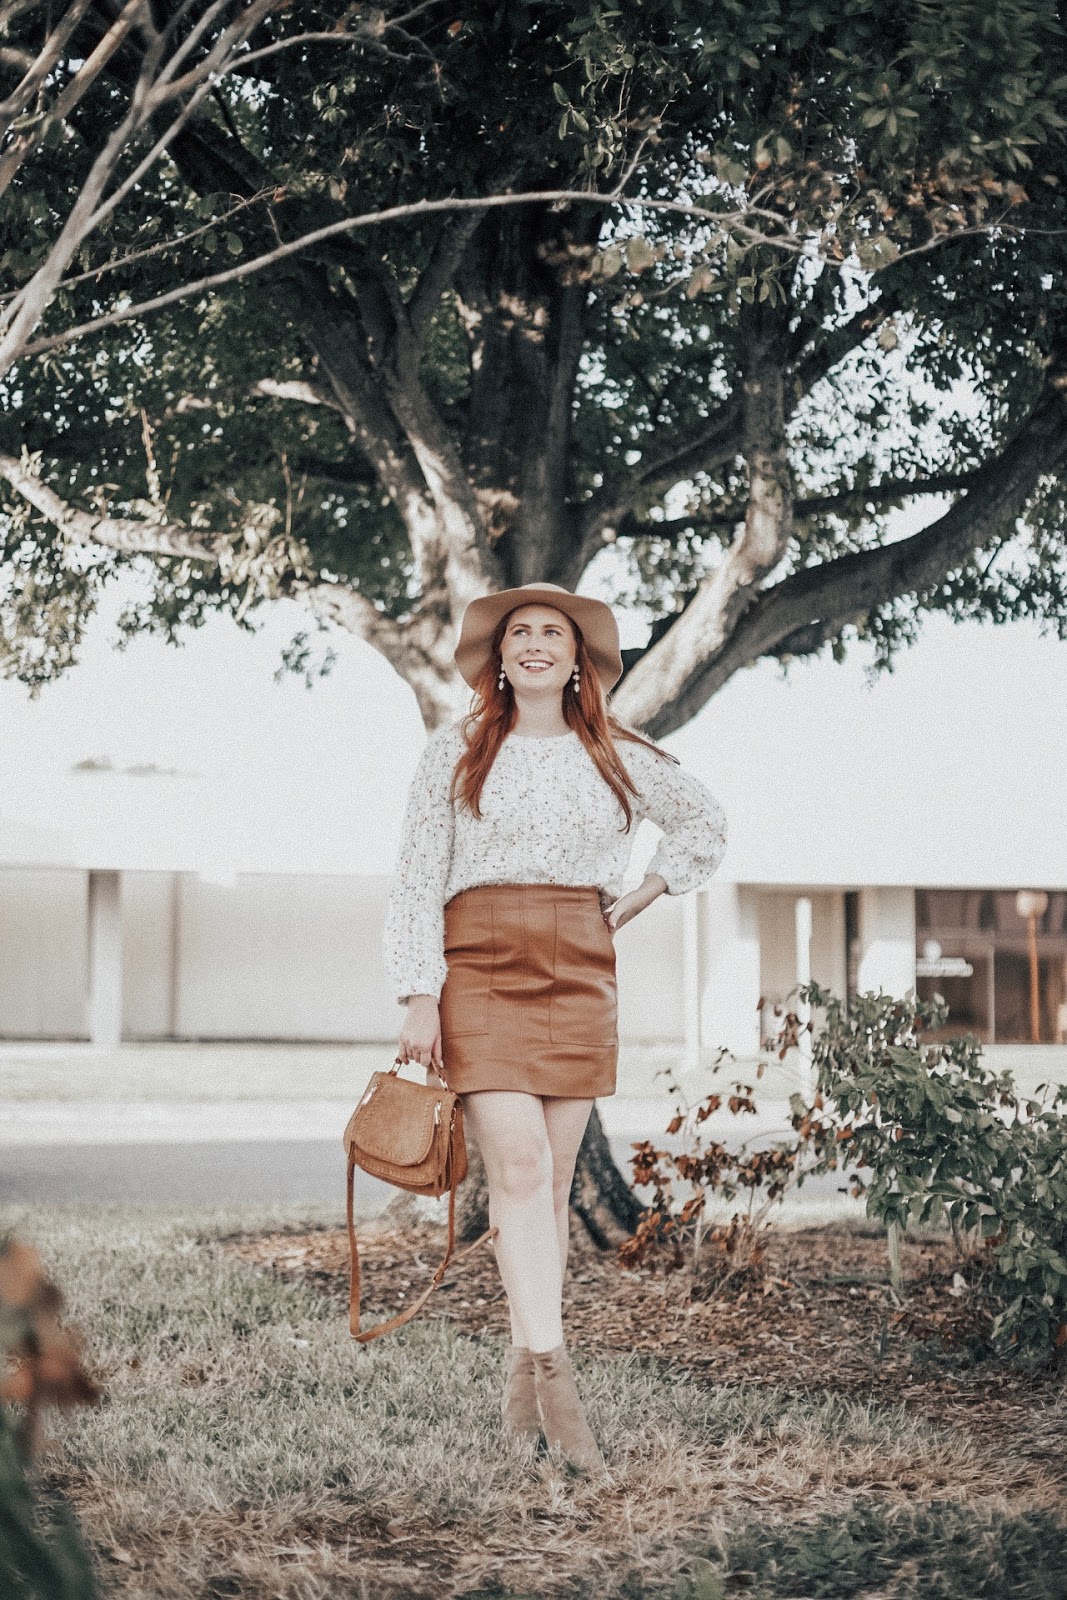 25+ Affordable Sweaters To Wear With Faux Leather Skirts | Affordable by Amanda, a Style Blog by Tampa Blogger Amanda Burrows | Faux Leather Miniskirt Style for Less